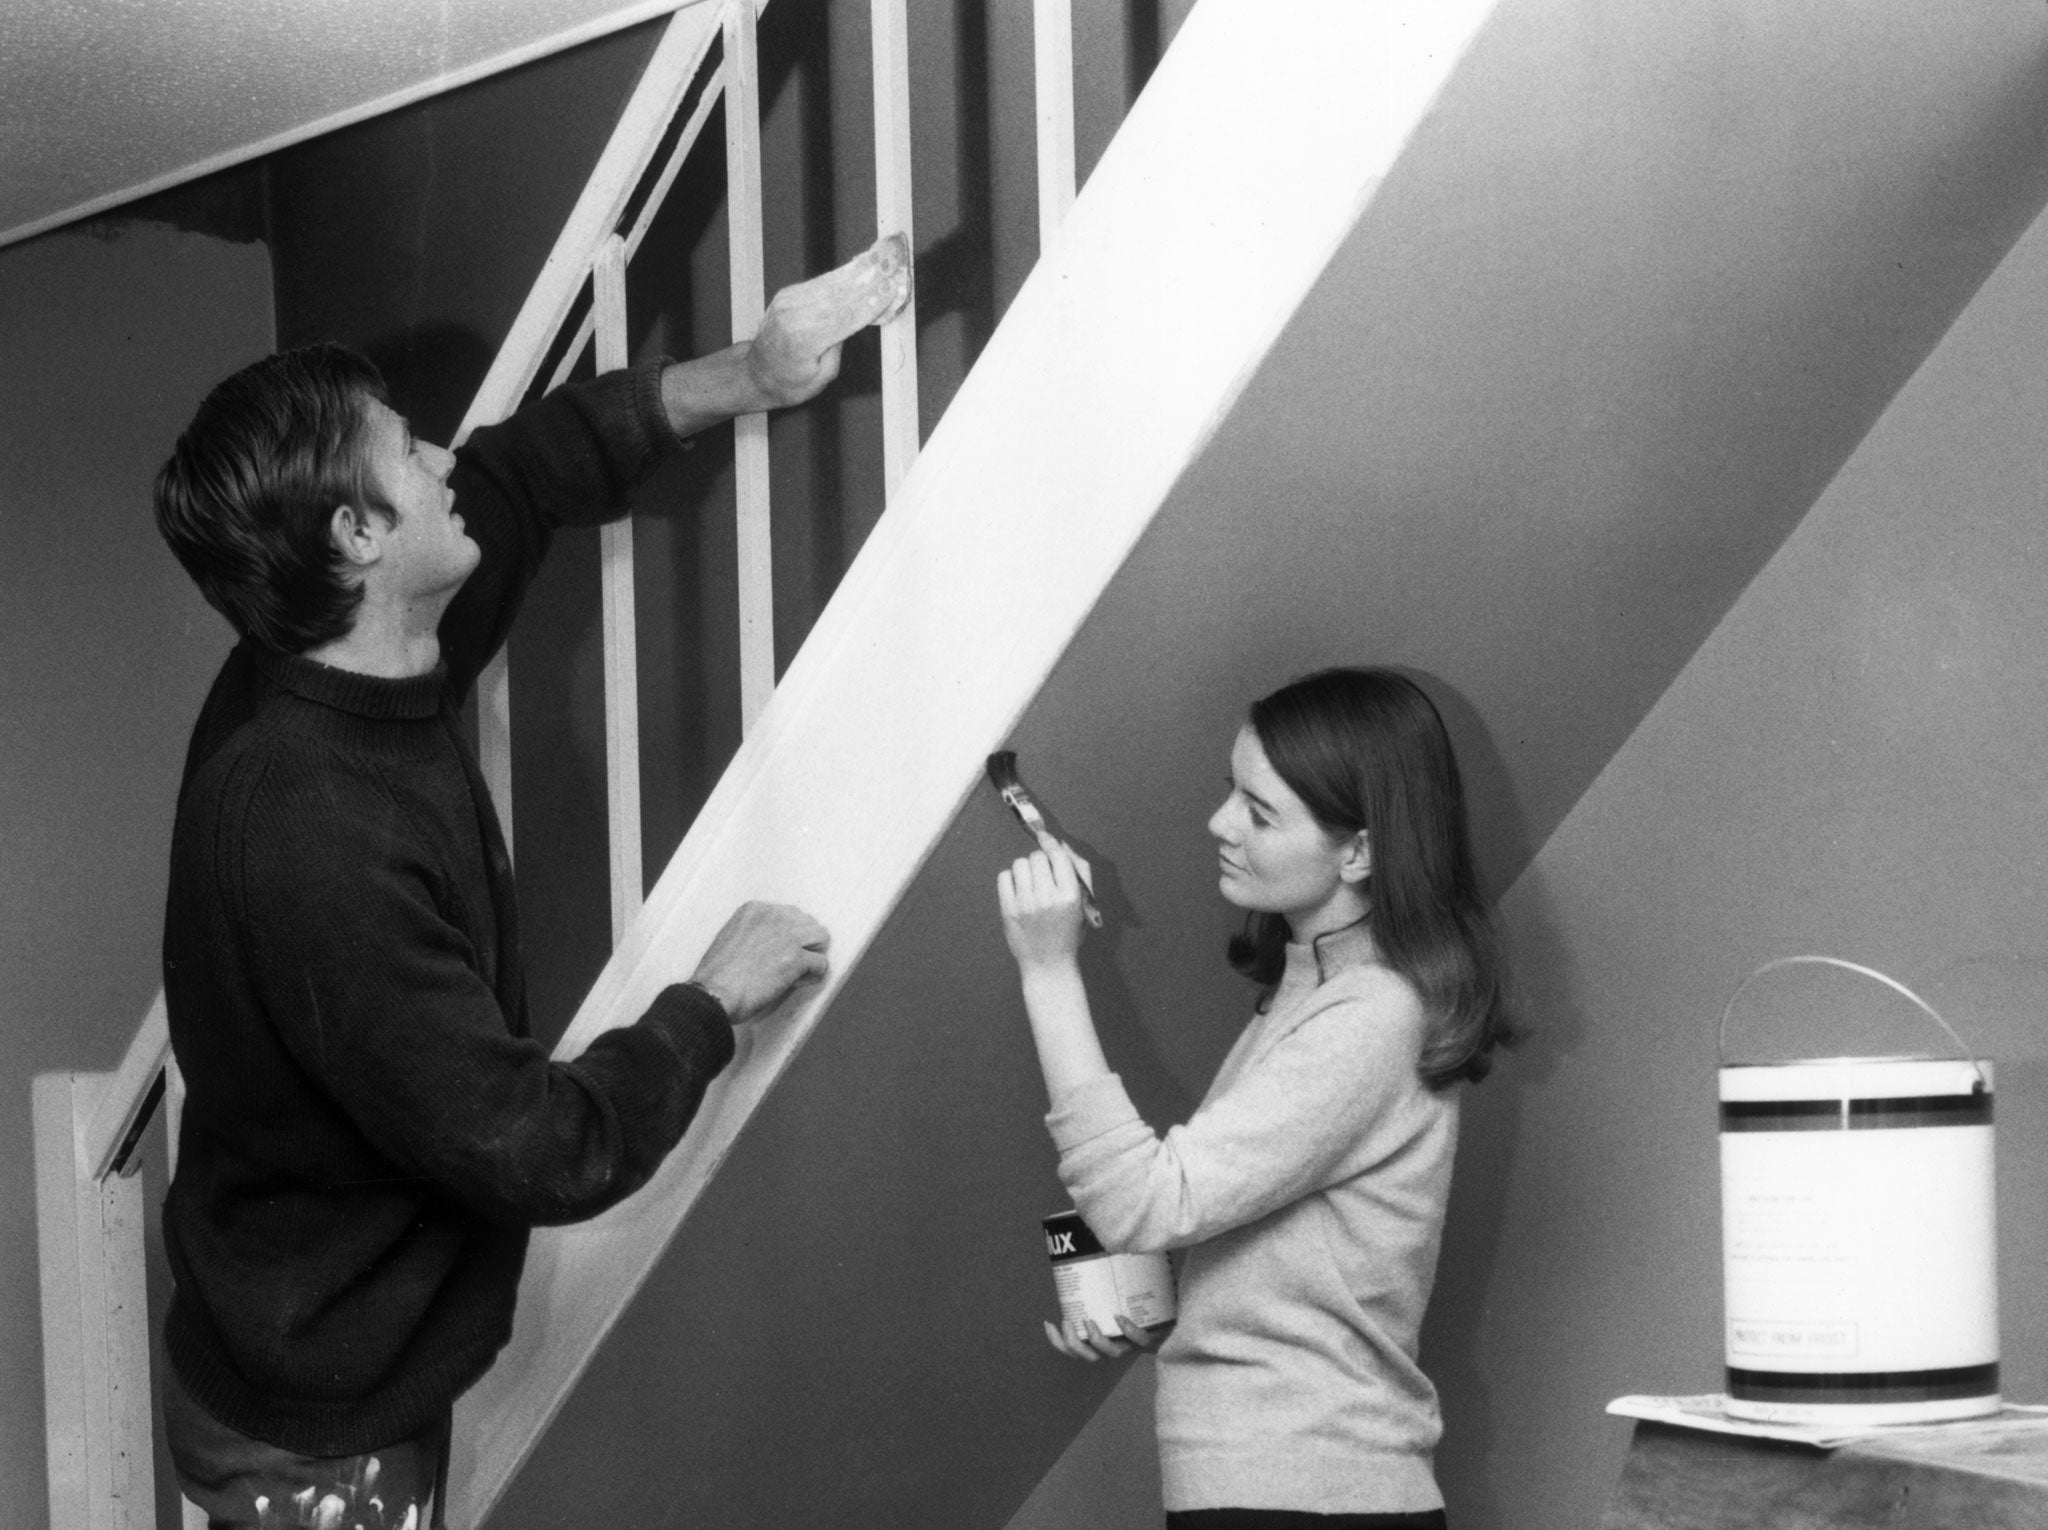 Christopher Davies, British yachtsman and Olympic gold medalist, with his bride-to-be, Ingrid Williams, redecorating their new home, 3 October 1972. Davies won gold in the Flying Dutchman Class at the 1972 Summer Olympics.